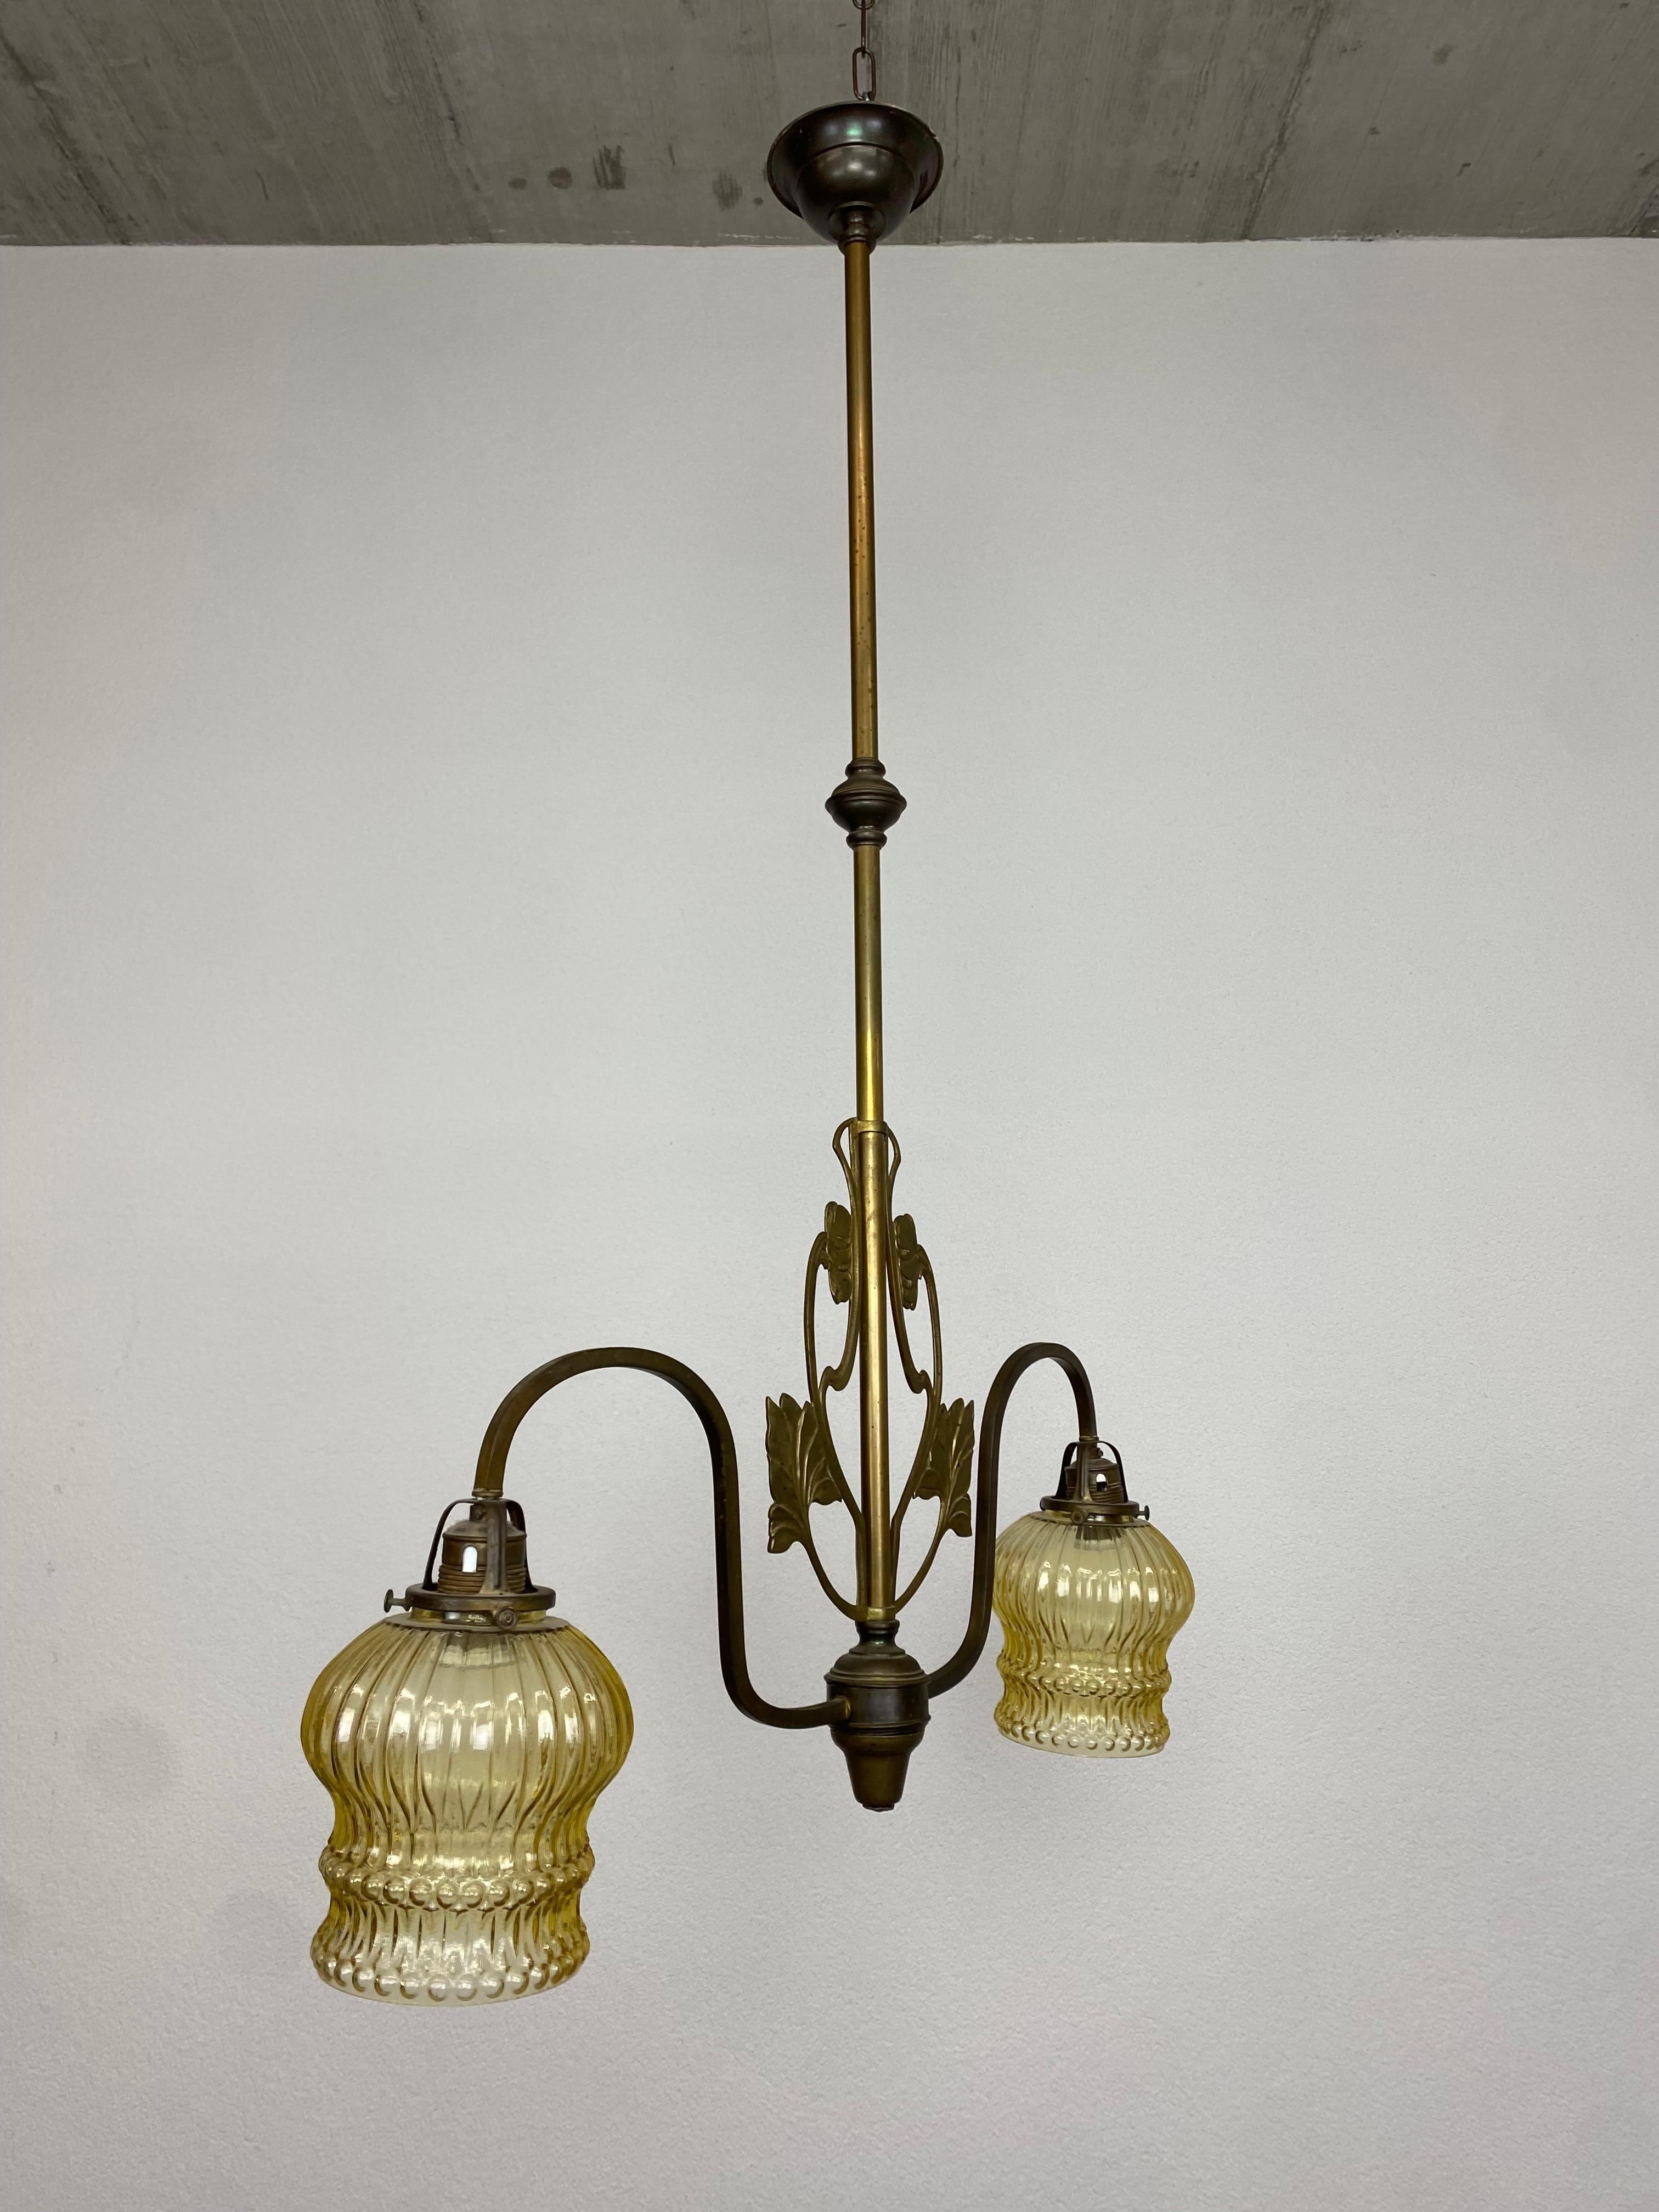 Brass jugendstil hanging lamp. Wear consistent with age and use.